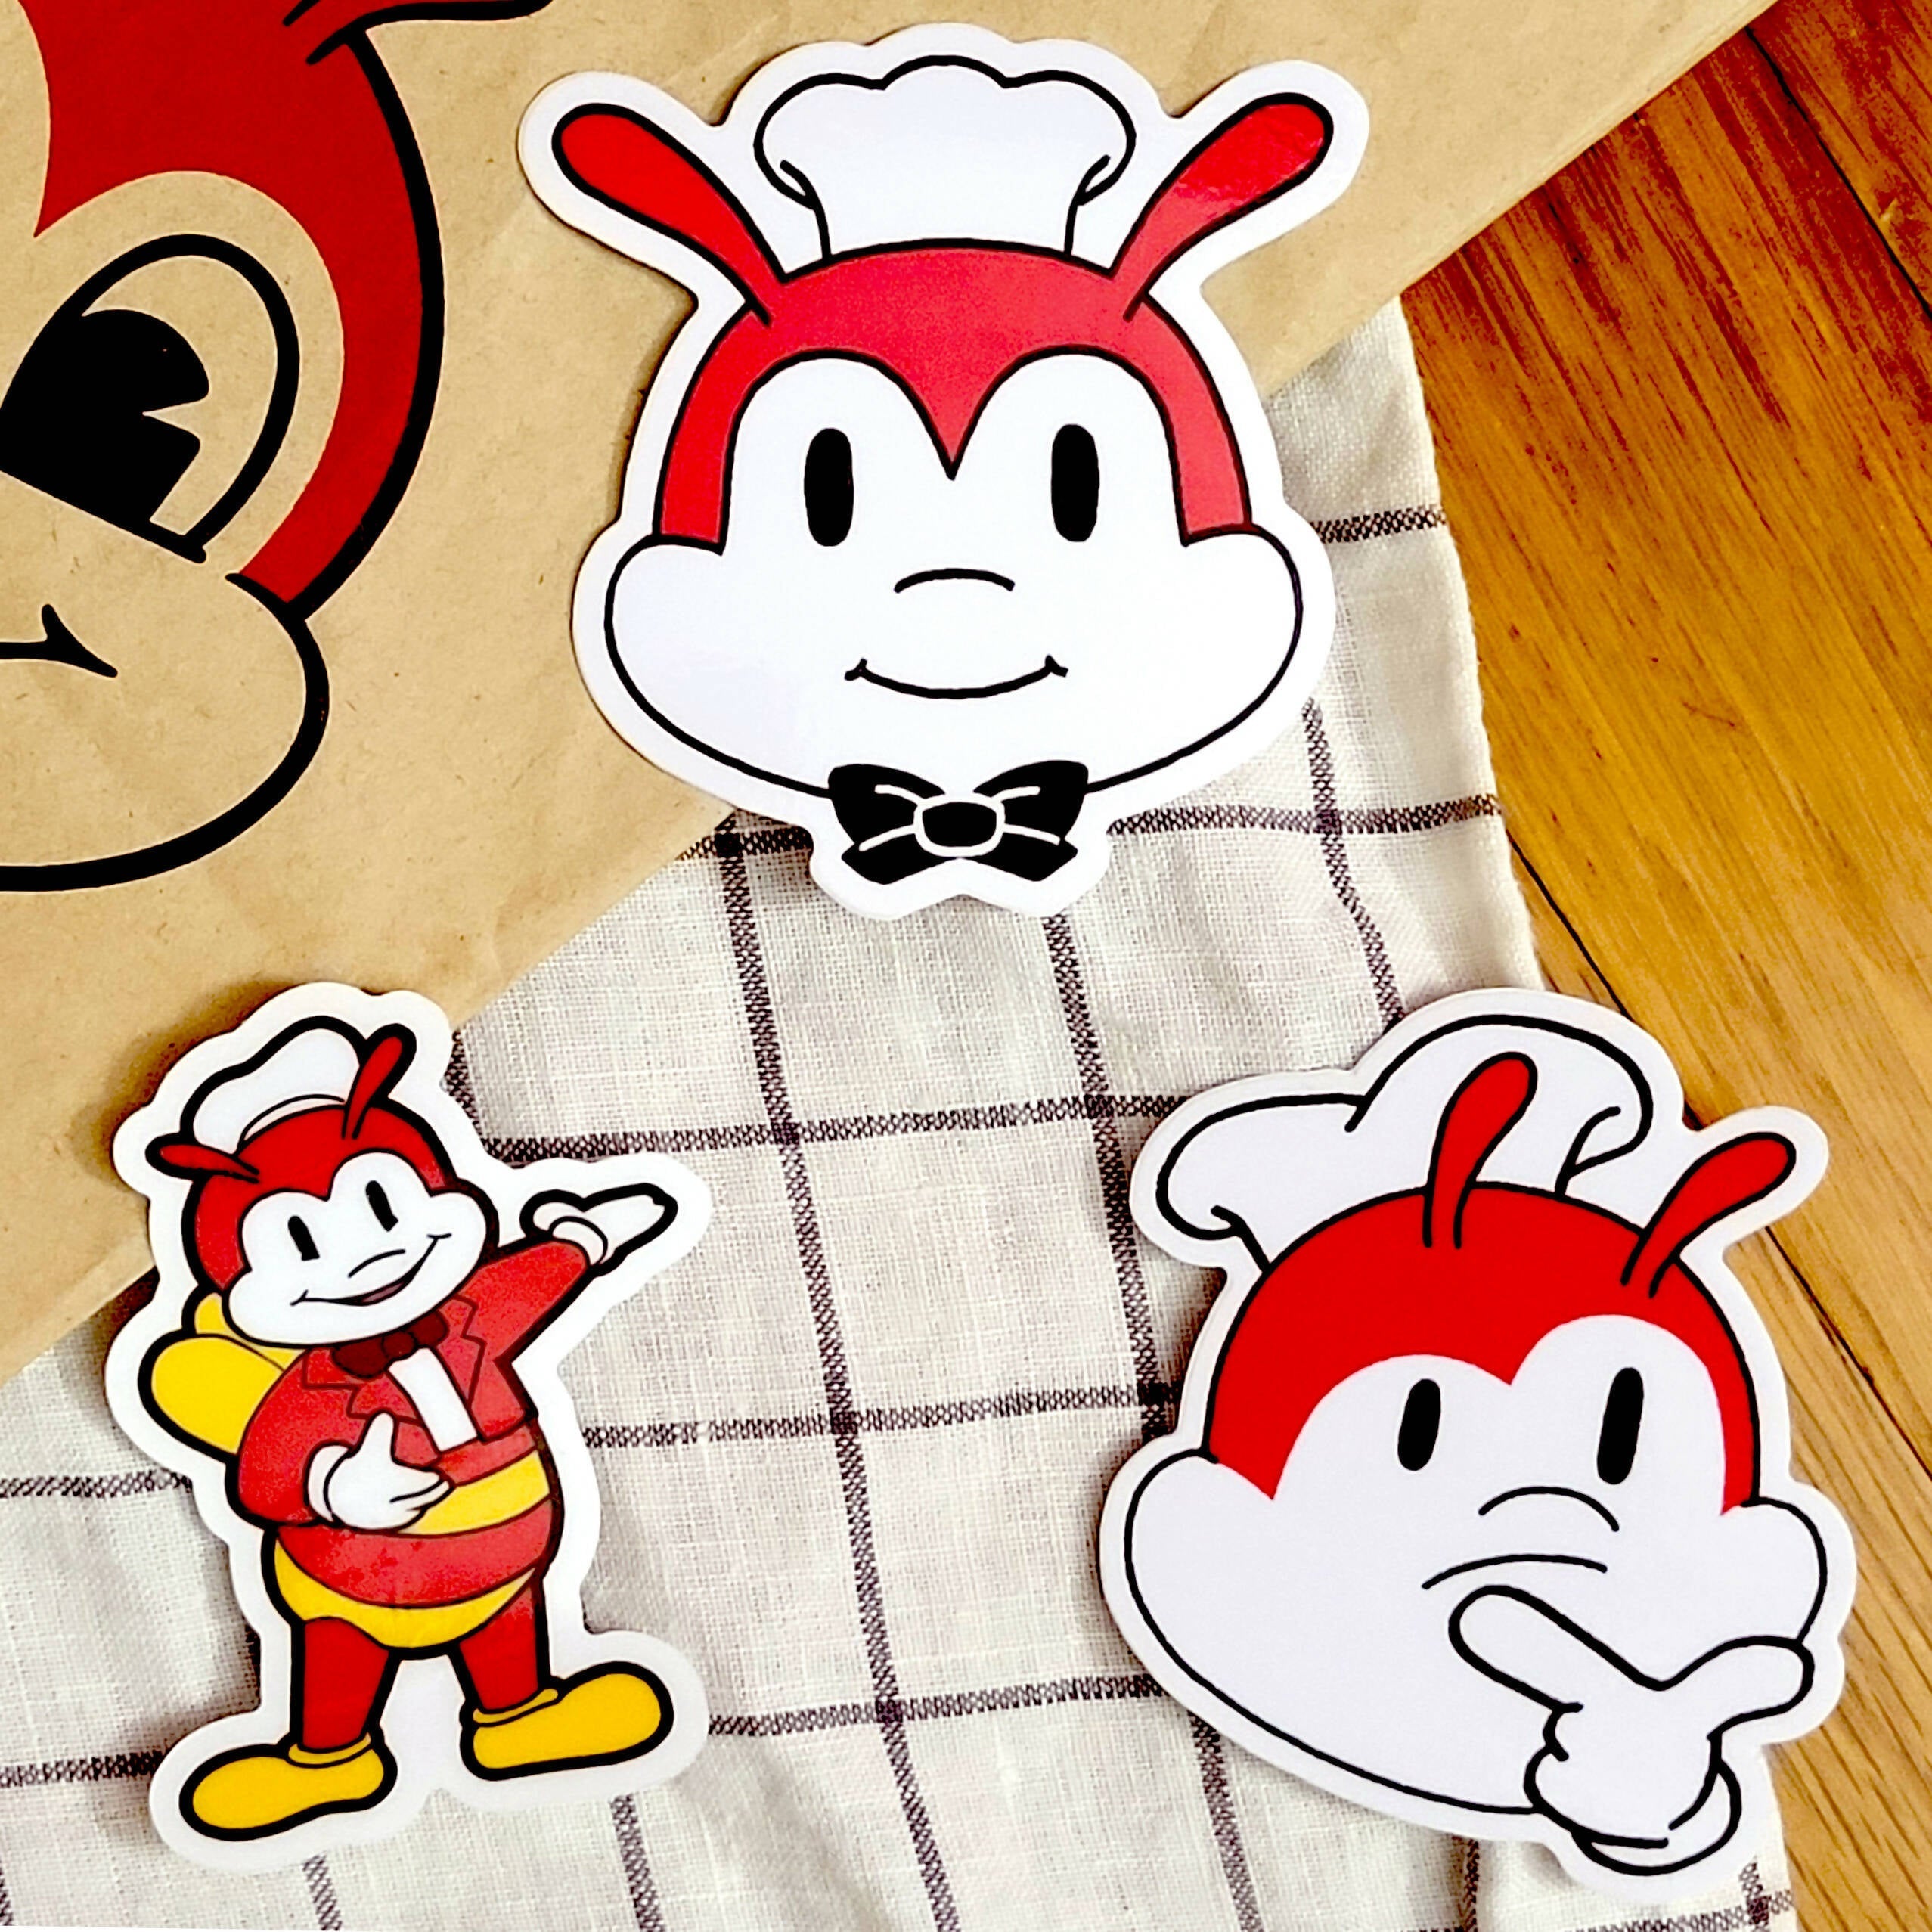 Standing and Posing Red Jolly Bee Food Mascot Sticker